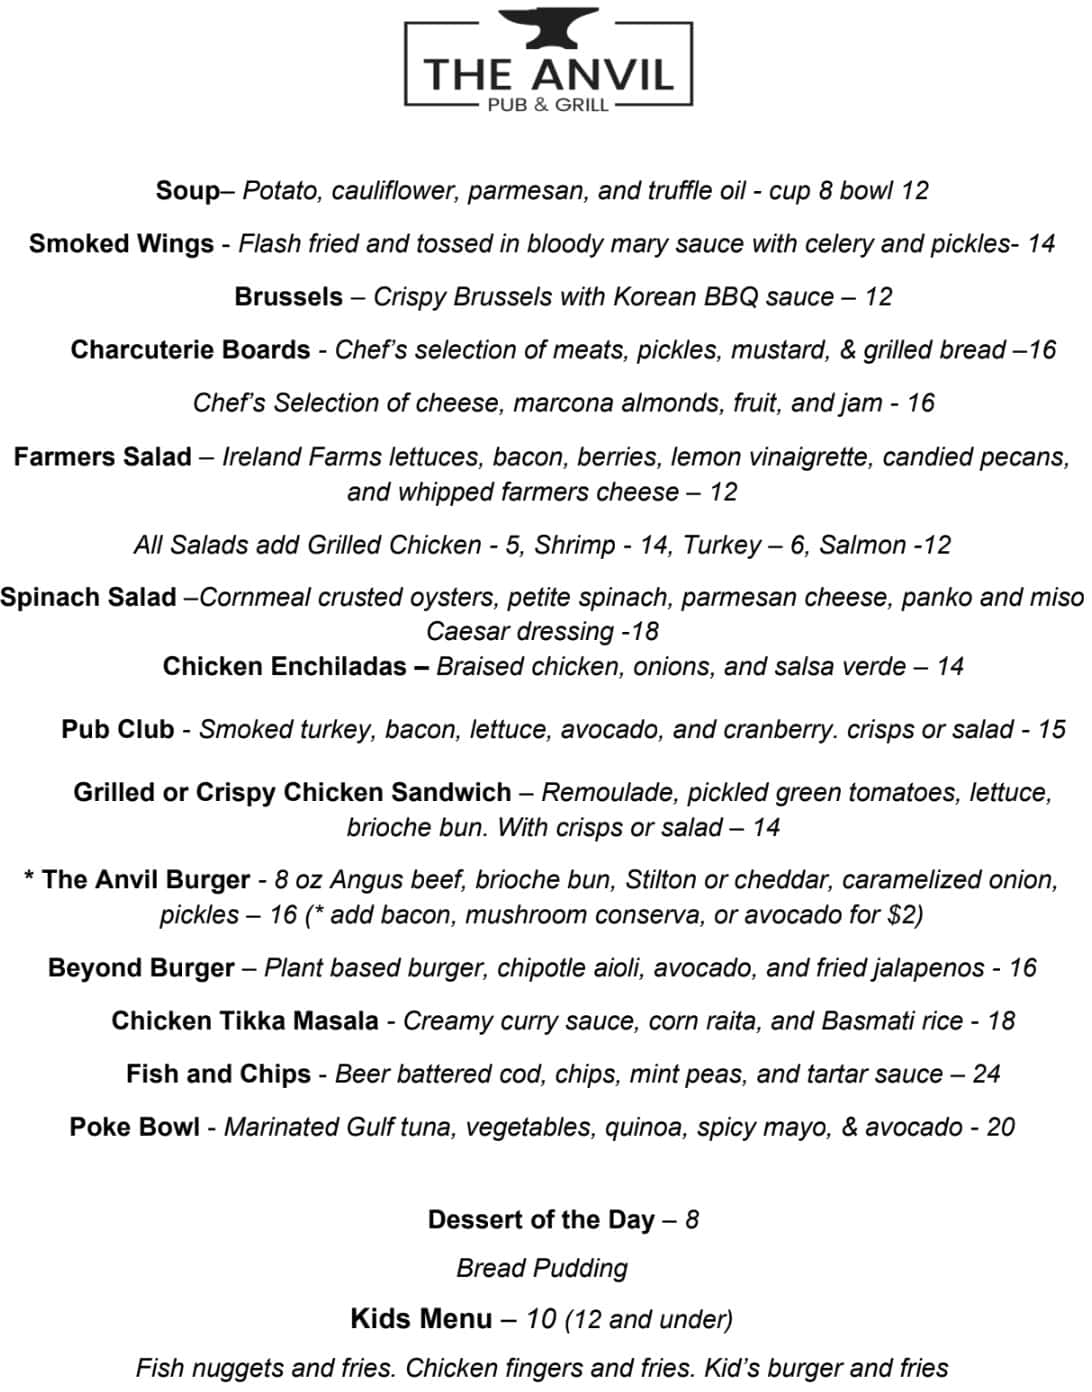 The Anvil Pub and Grill Lunch Menu